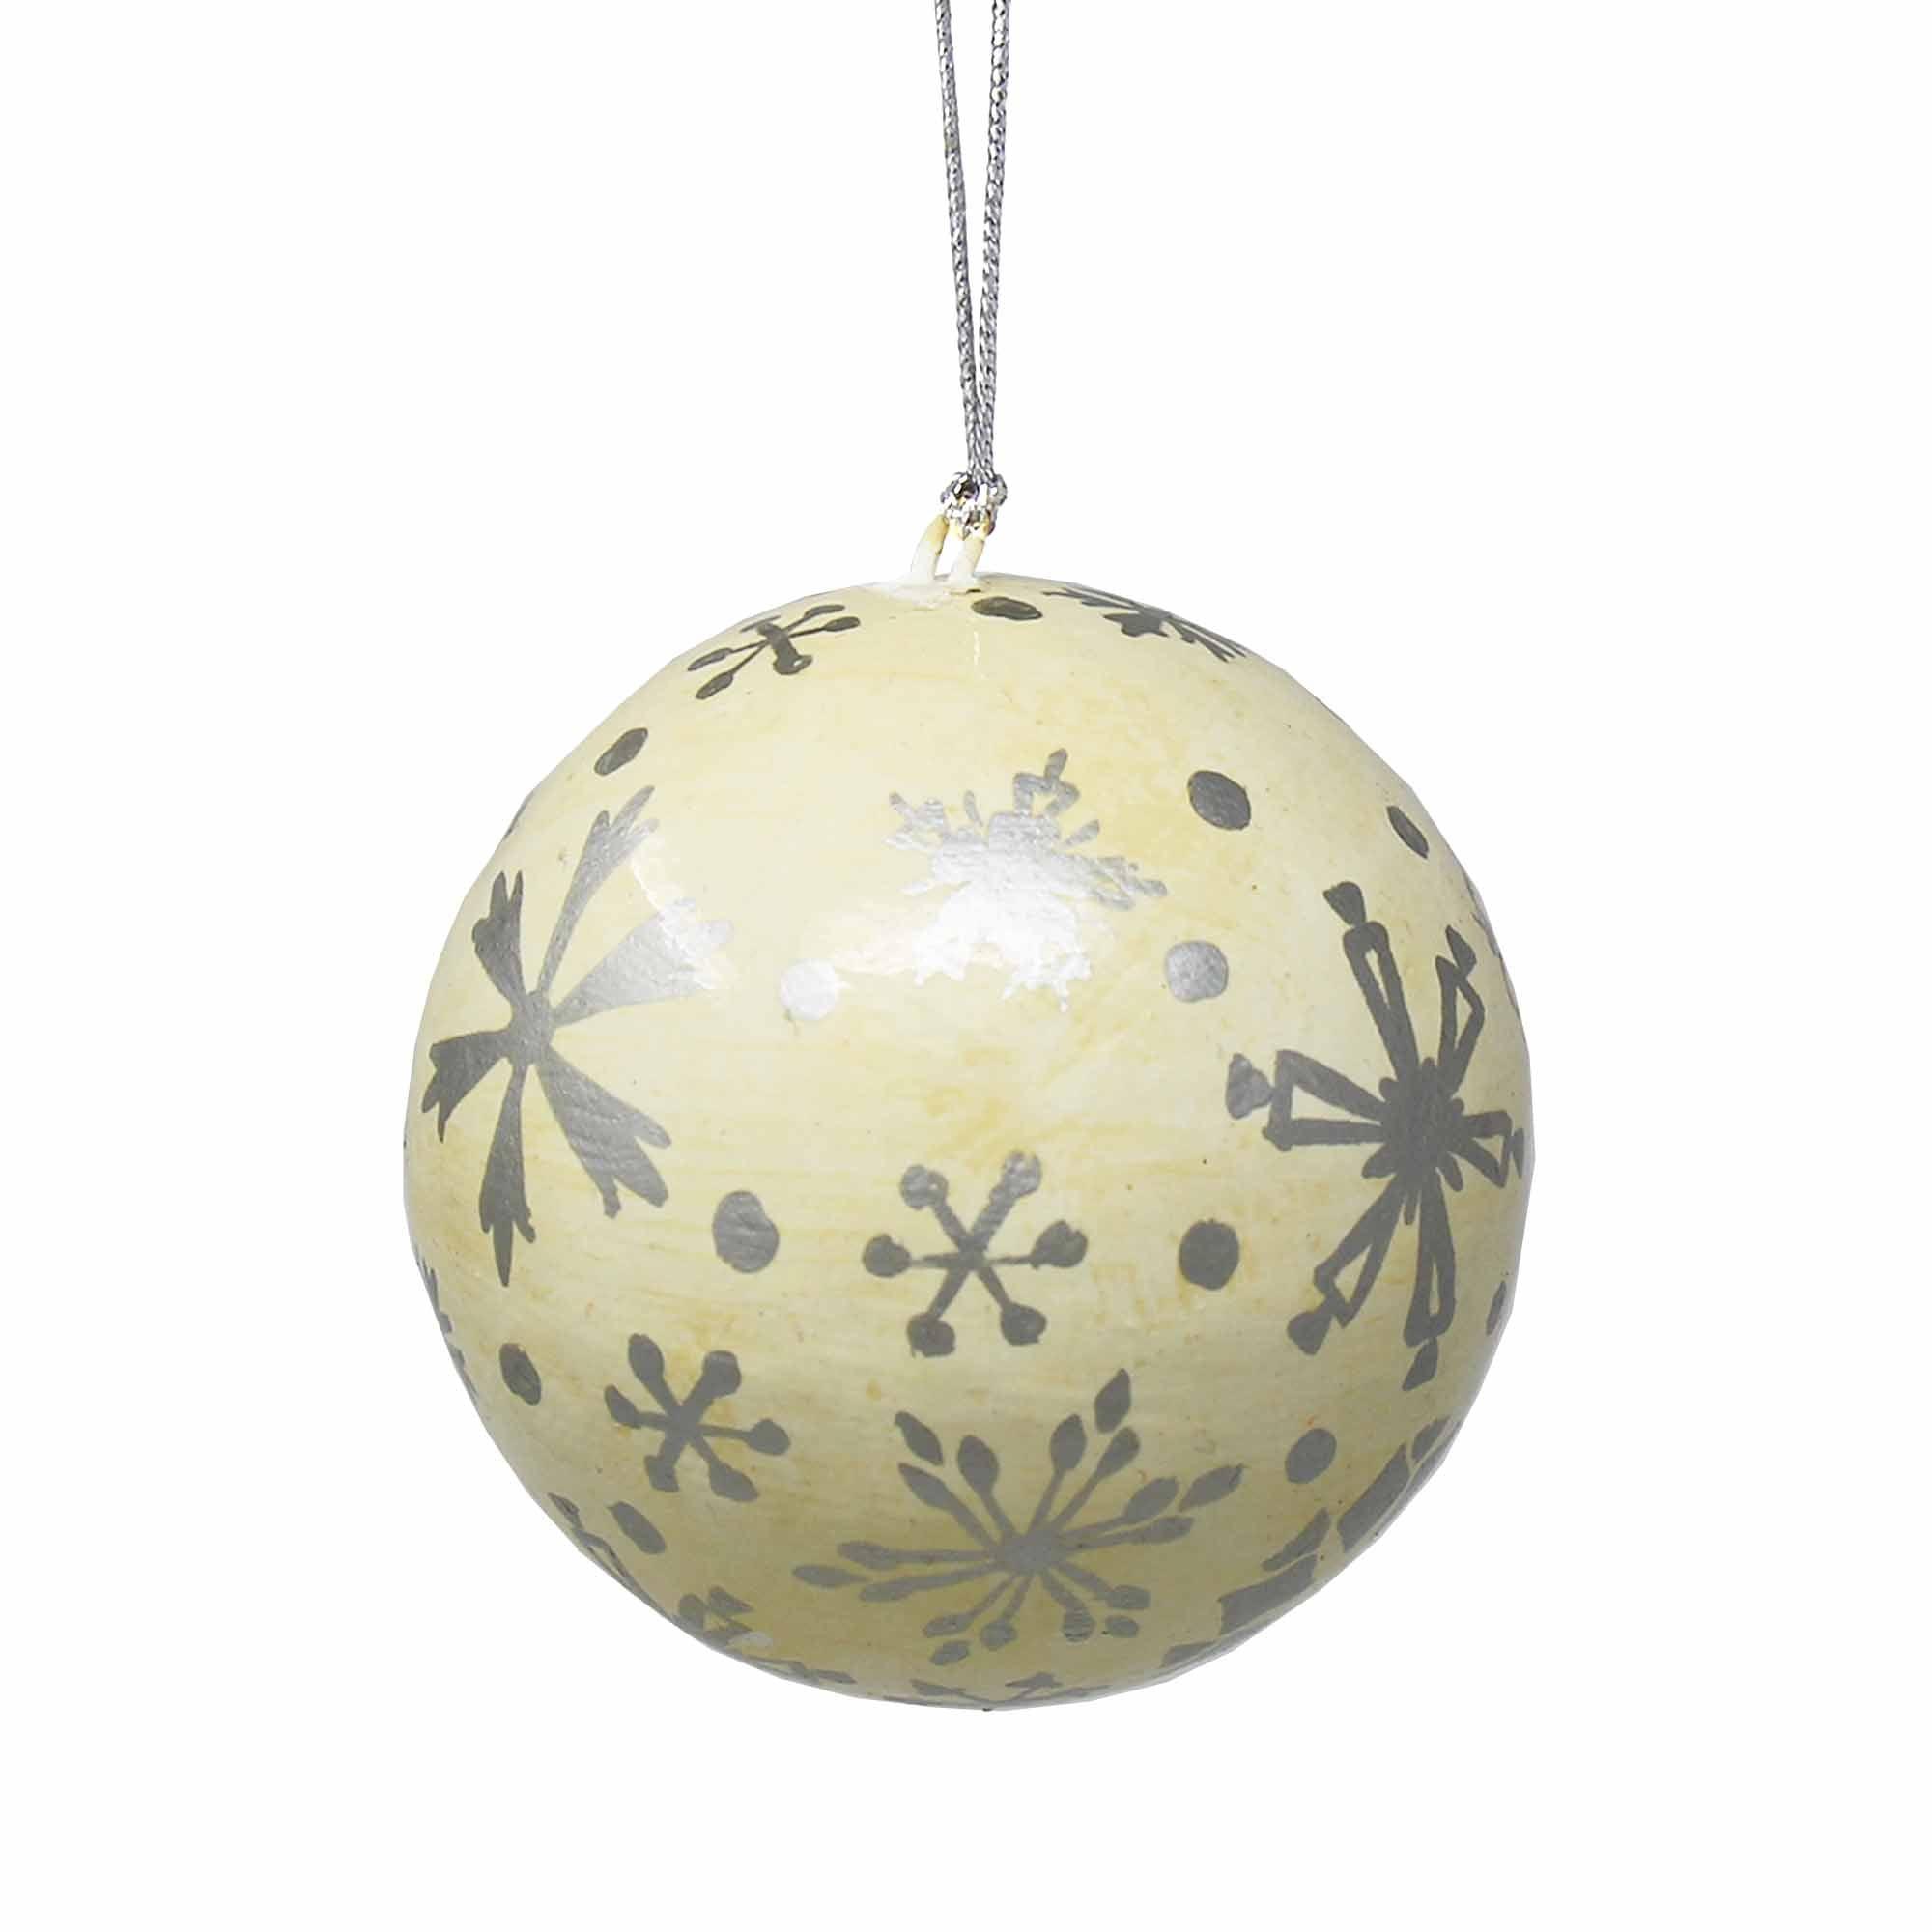 Handpainted Ornaments, Silver Snowflakes - Pack of 3 - Flyclothing LLC